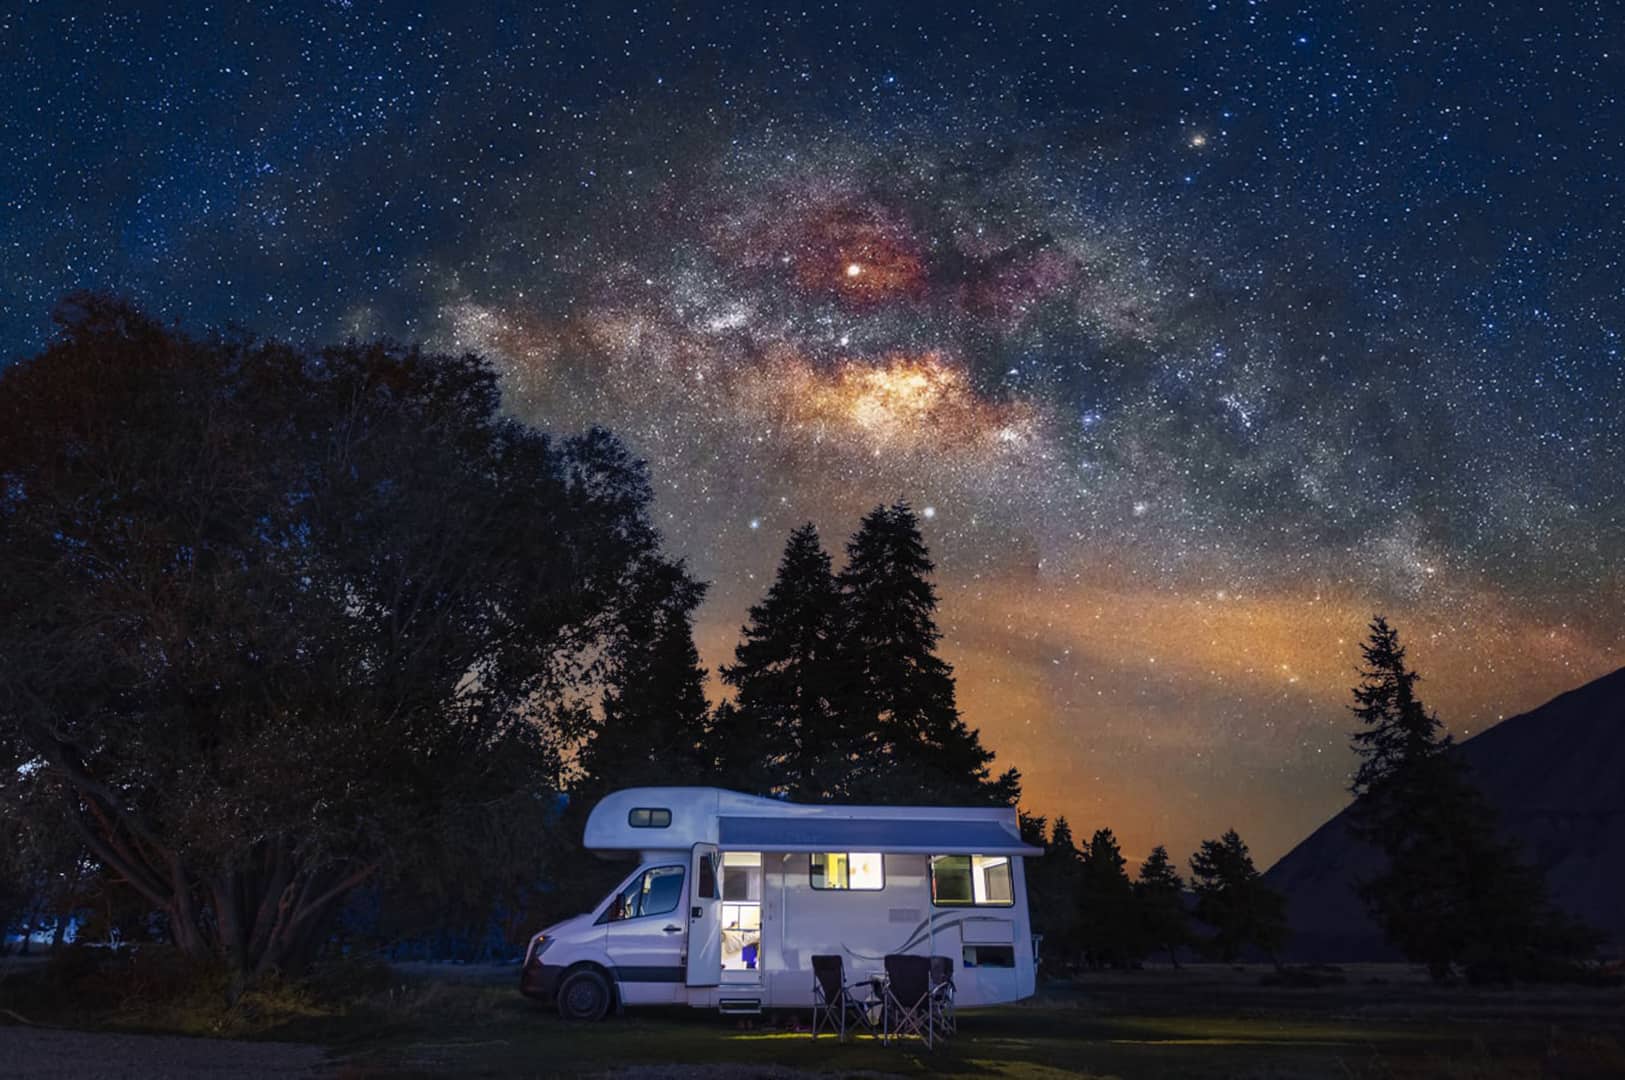 How much electricity does an RV use in one month